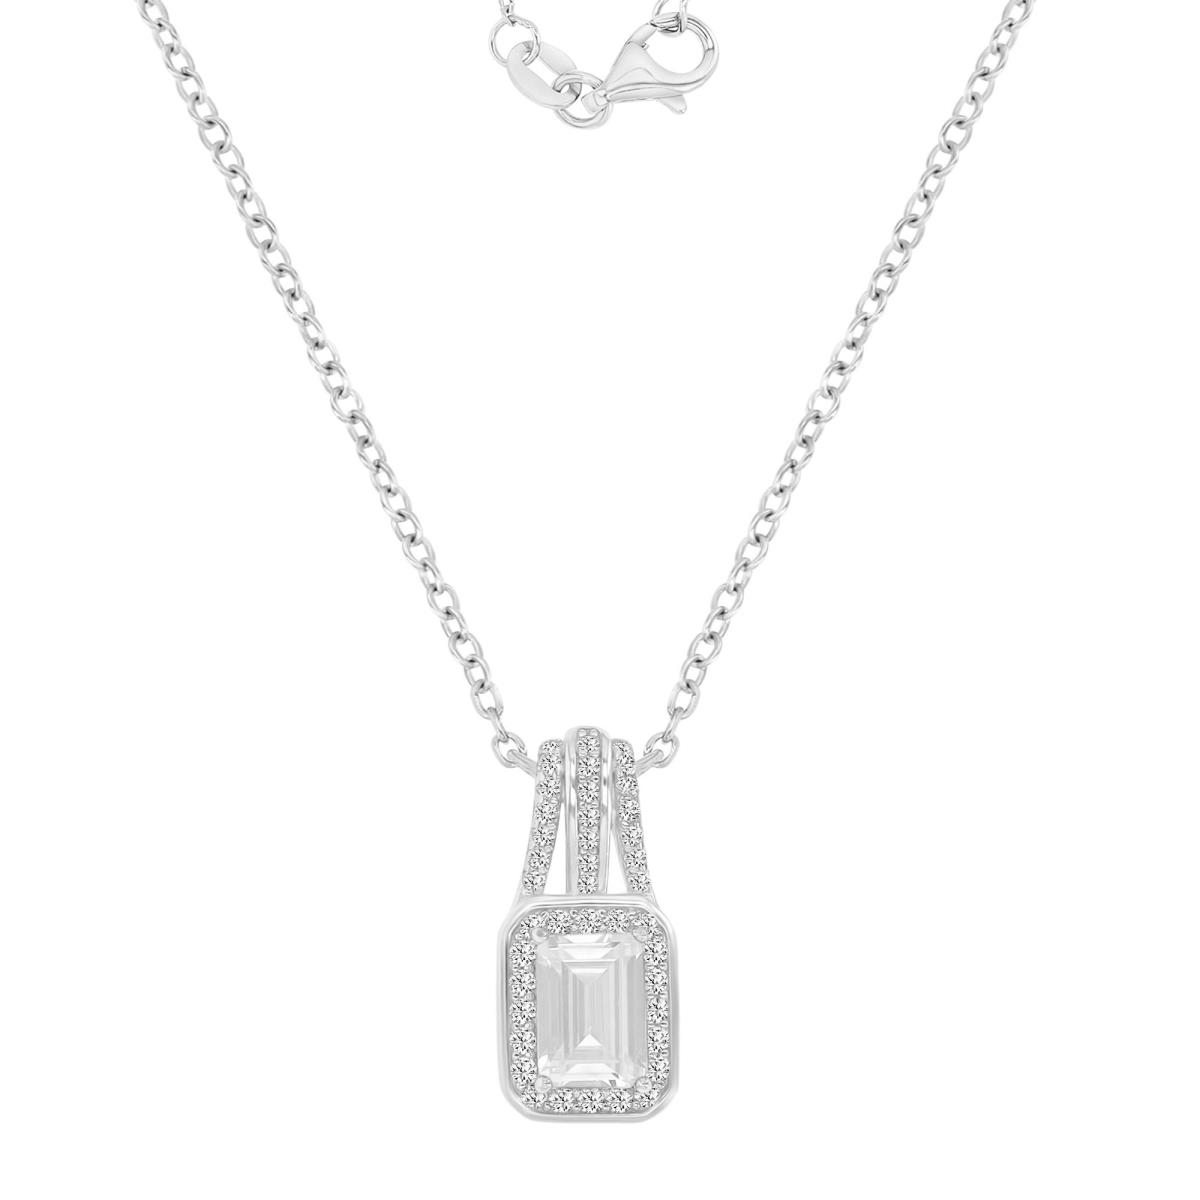 Sterling Silver Rhodium 18X8.3MM Polished White CZ Emerald Cut Dangling Pendant Cable Chain 16+2" Necklace